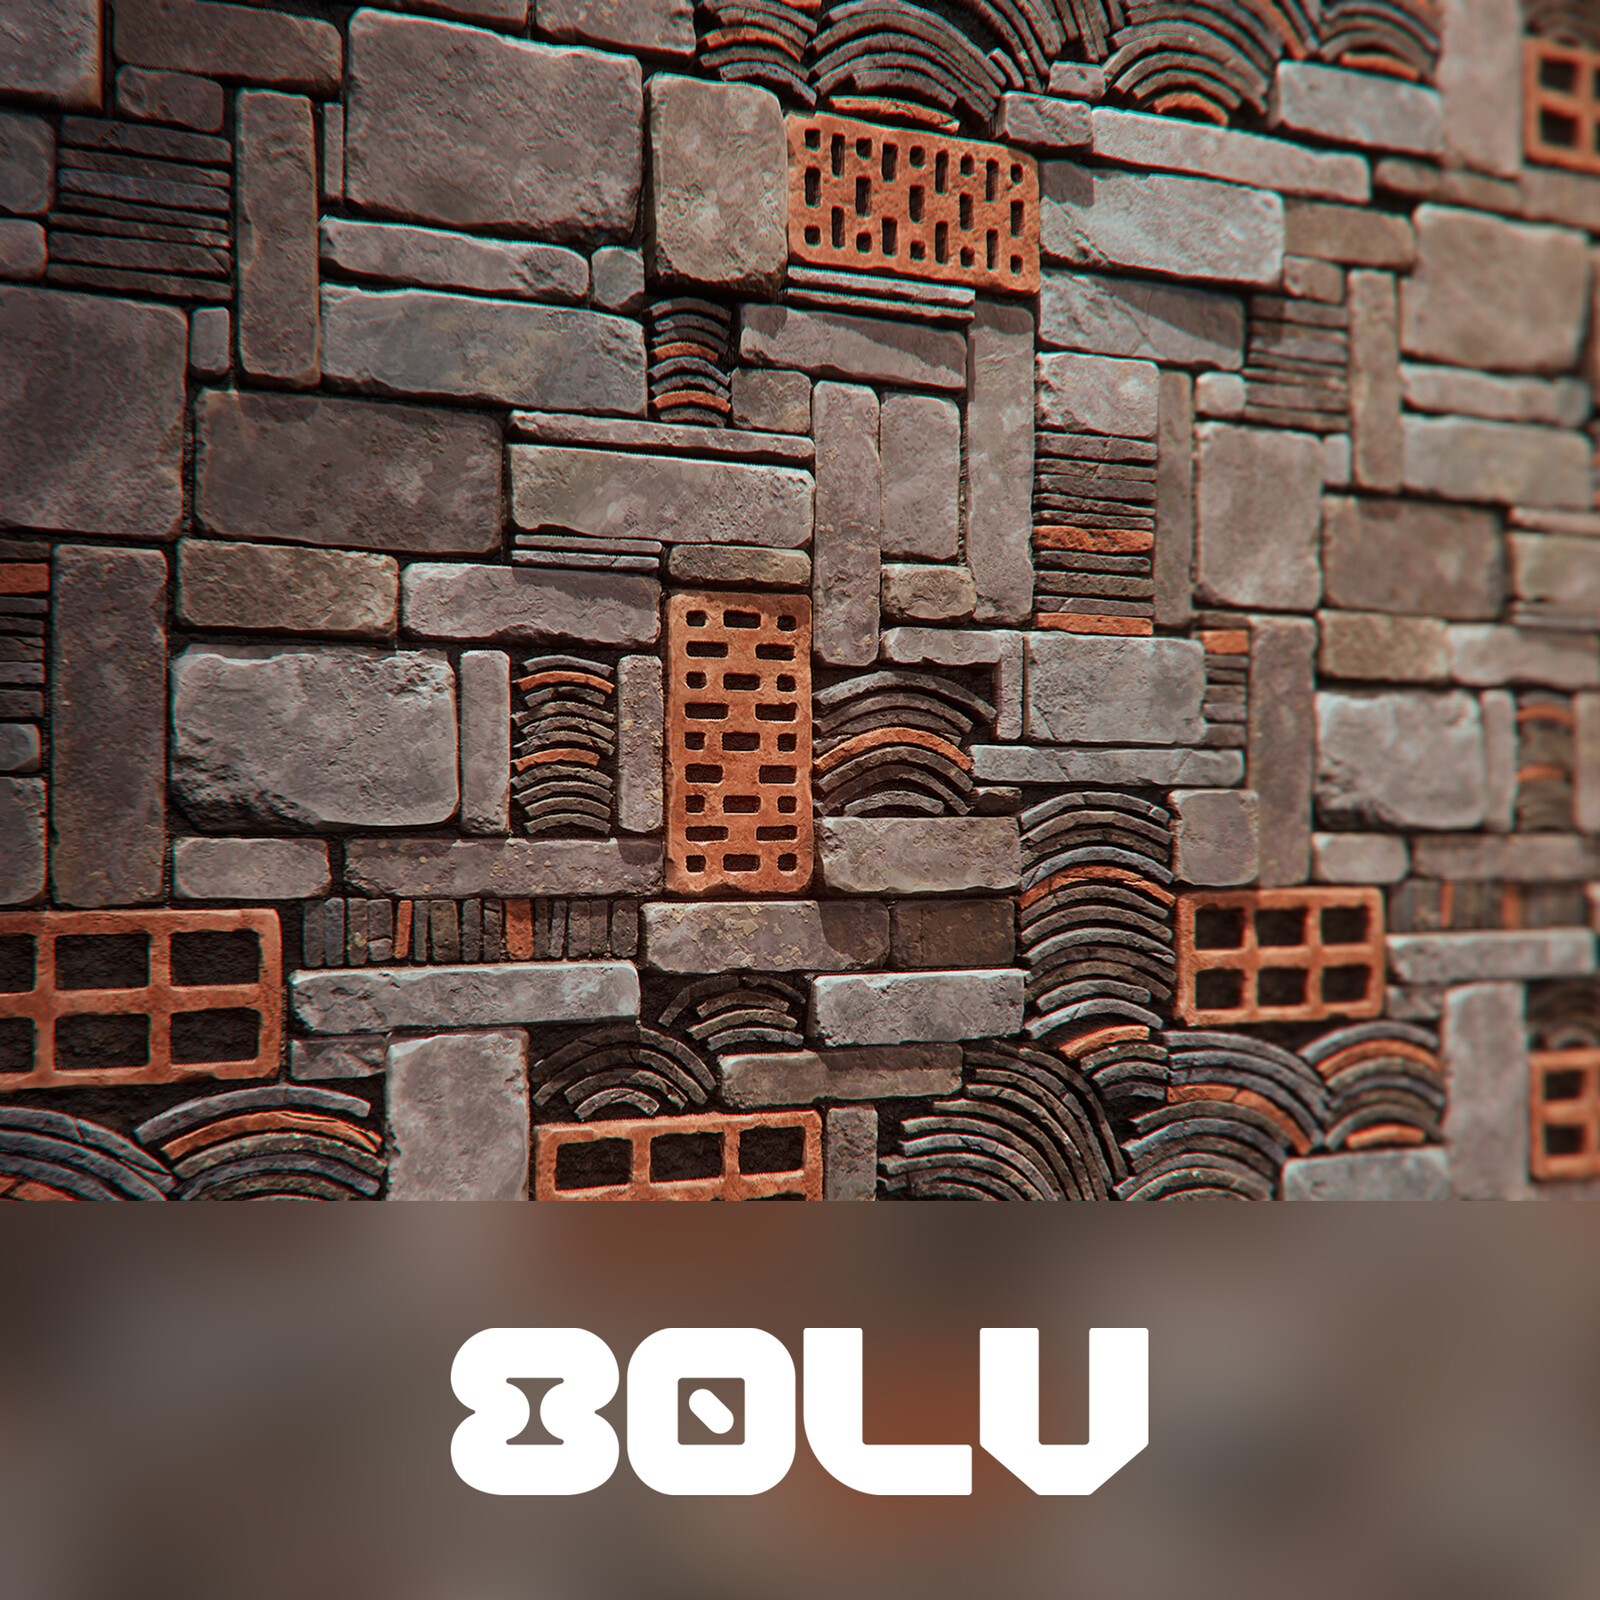 80.lv Article - Using ZBrush+Substance Designer Combo to Create a Brick Material